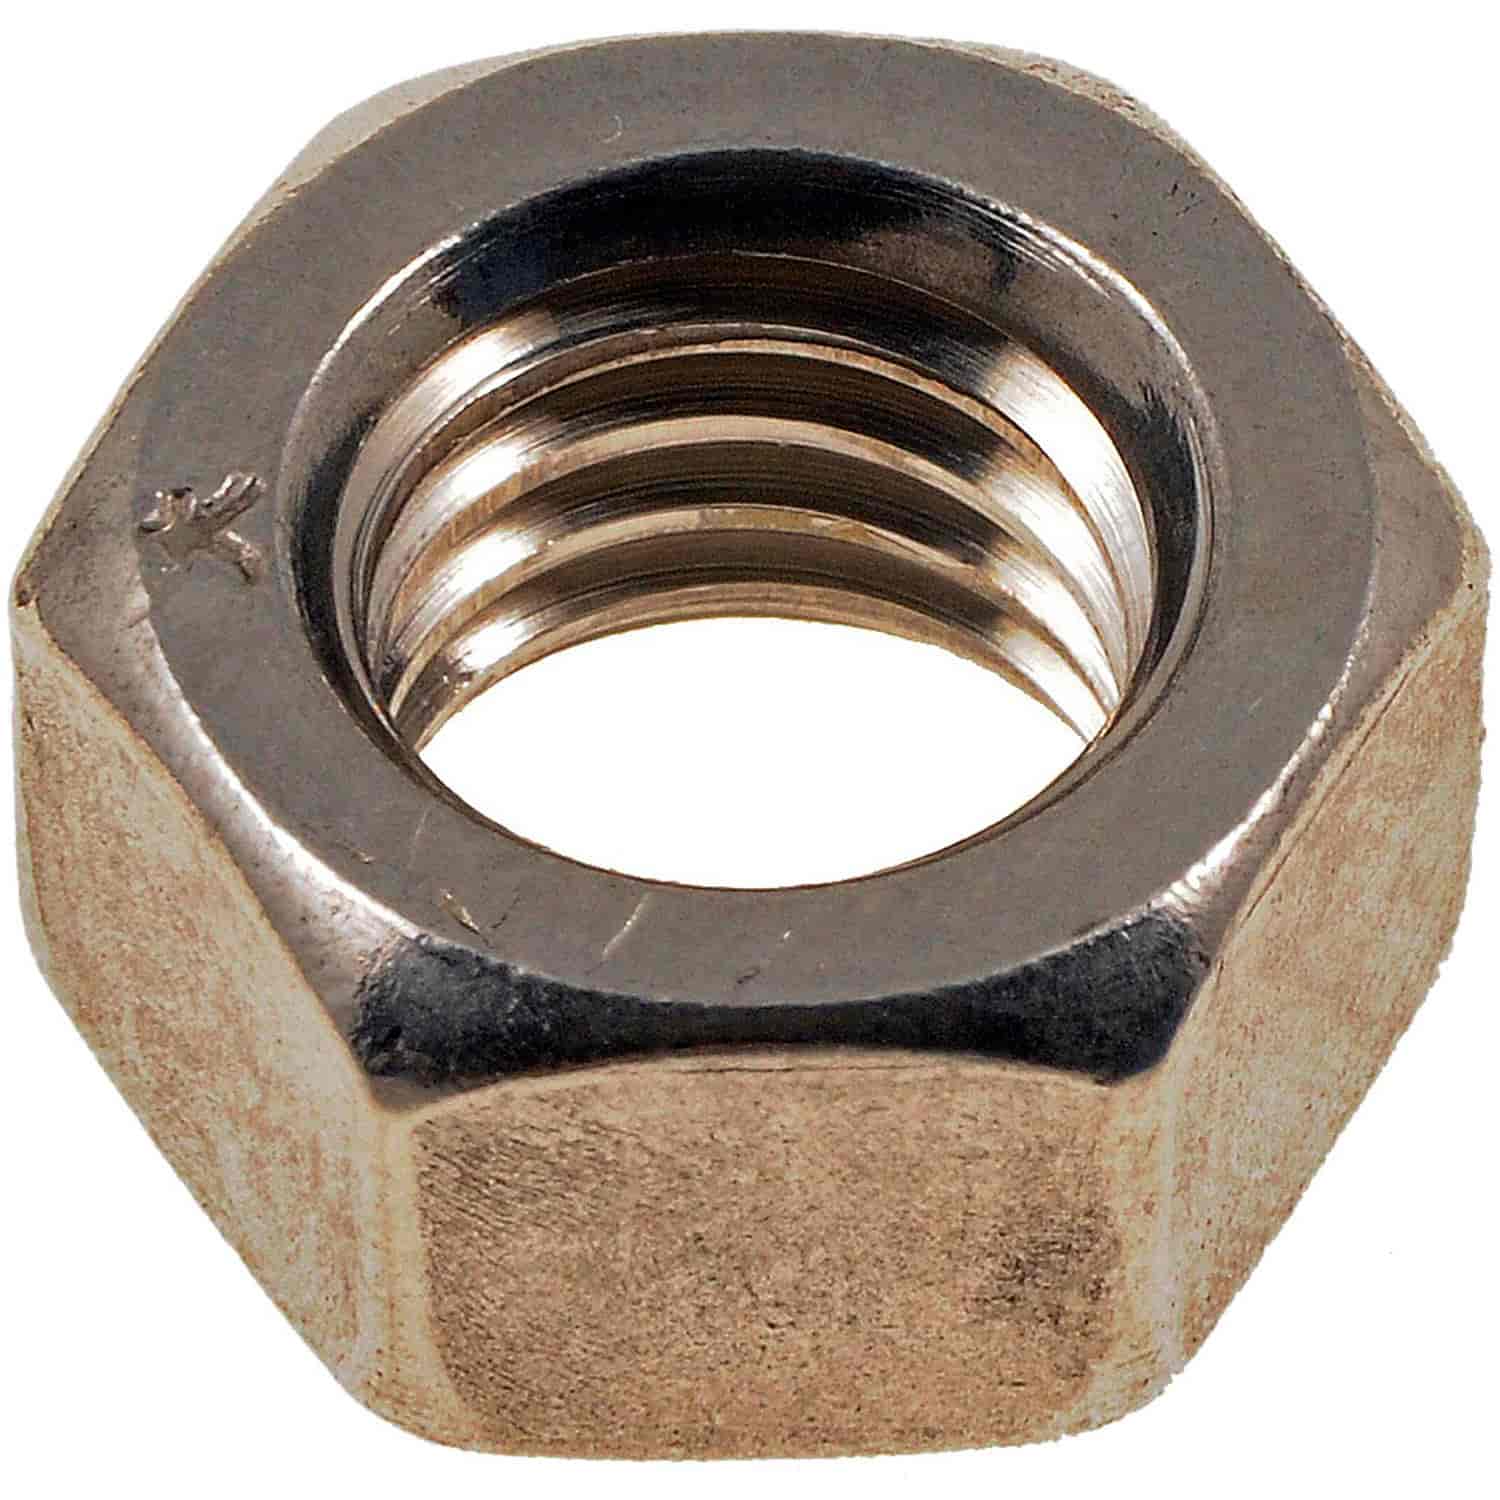 Hex Nut-Stainless Steel-Thread Size- 3/8-16 In.